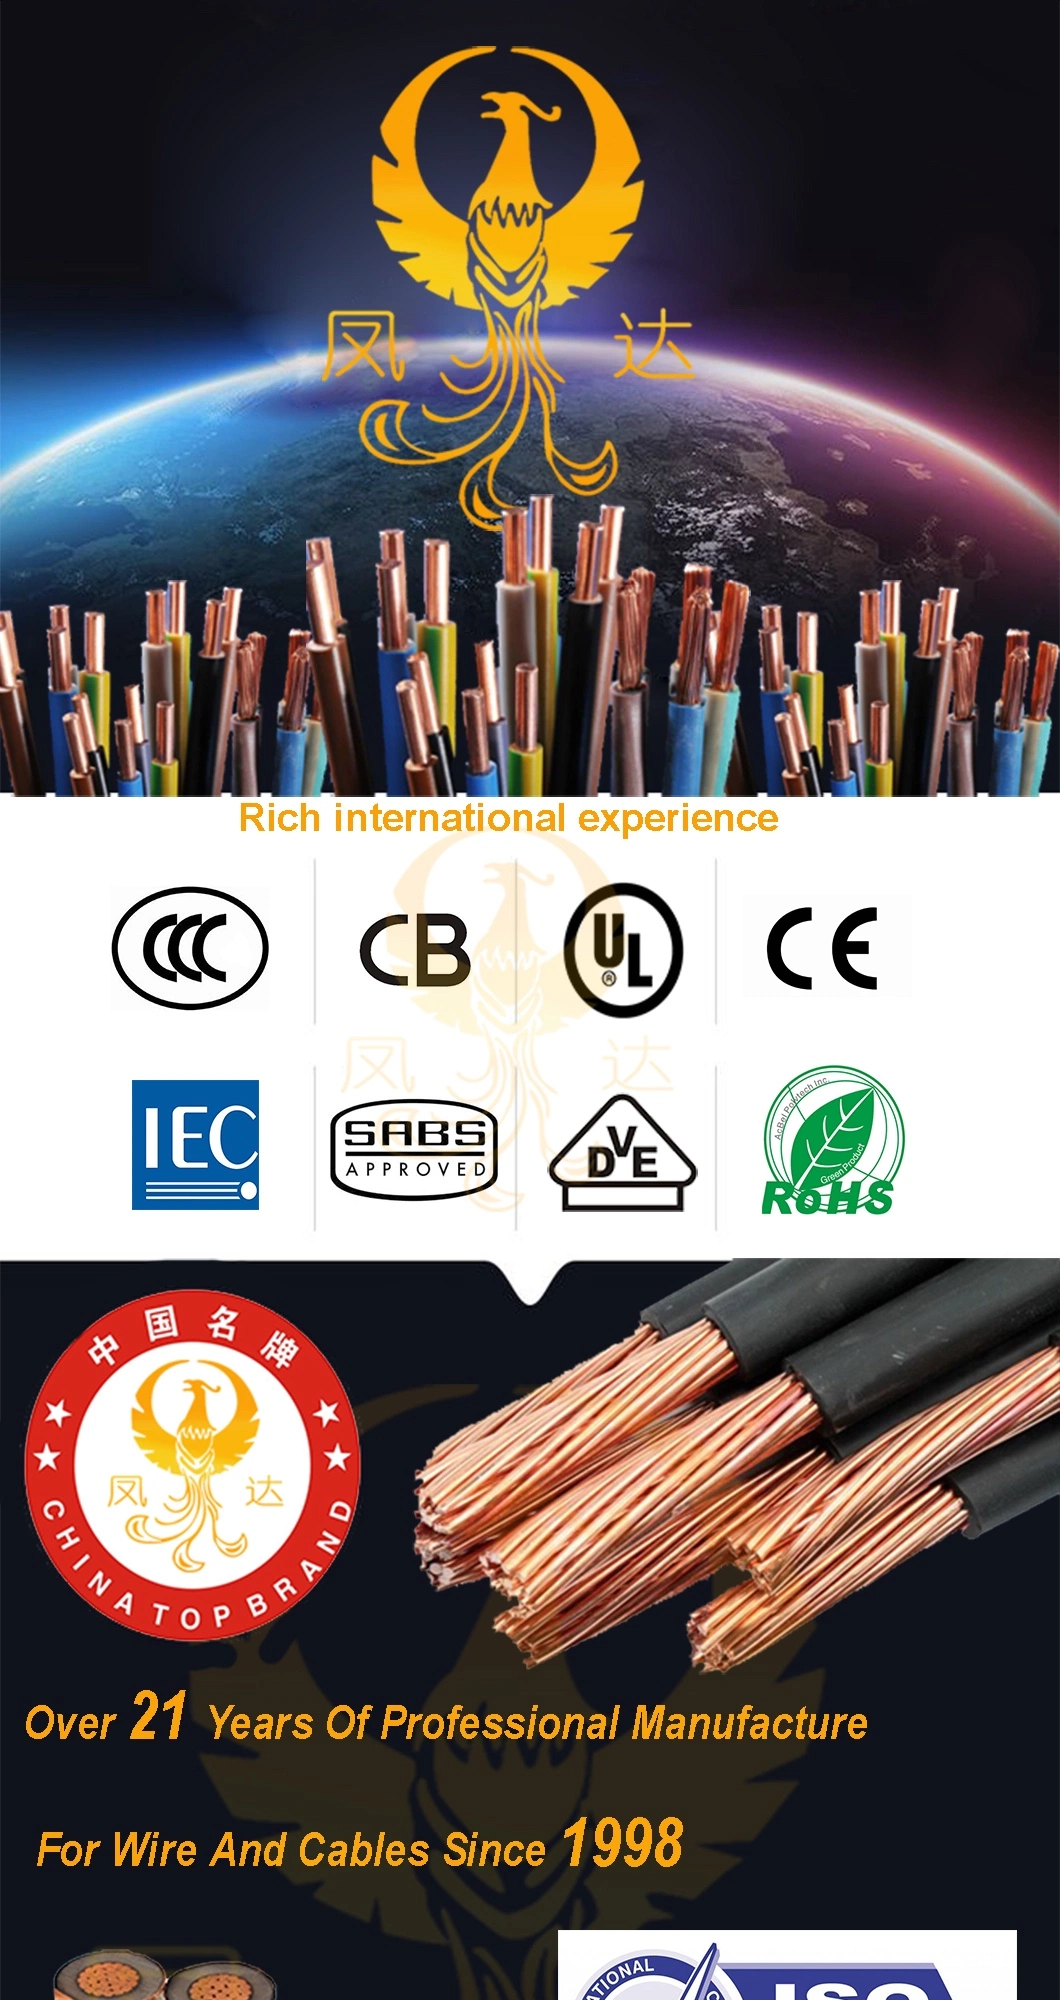 (N) Tscgewoeu Medium Voltage Reeling Cable with Fiber Optics Mining Cable for Connection of Large Mobile Equipment